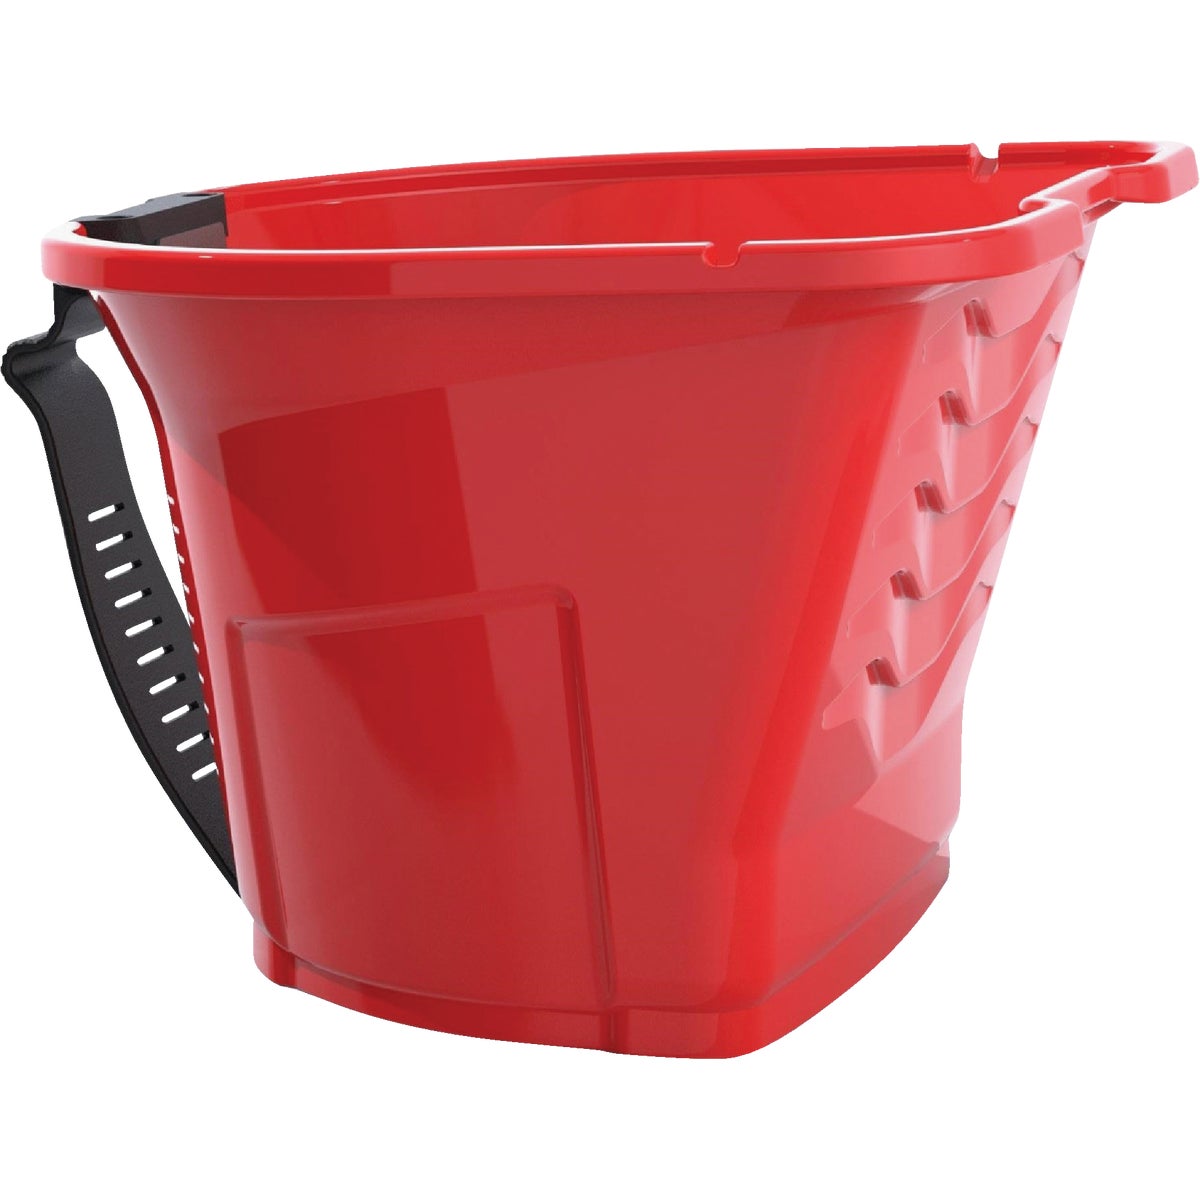 Item 771715, The HANDy Pro Pail was designed for larger projects for both the 